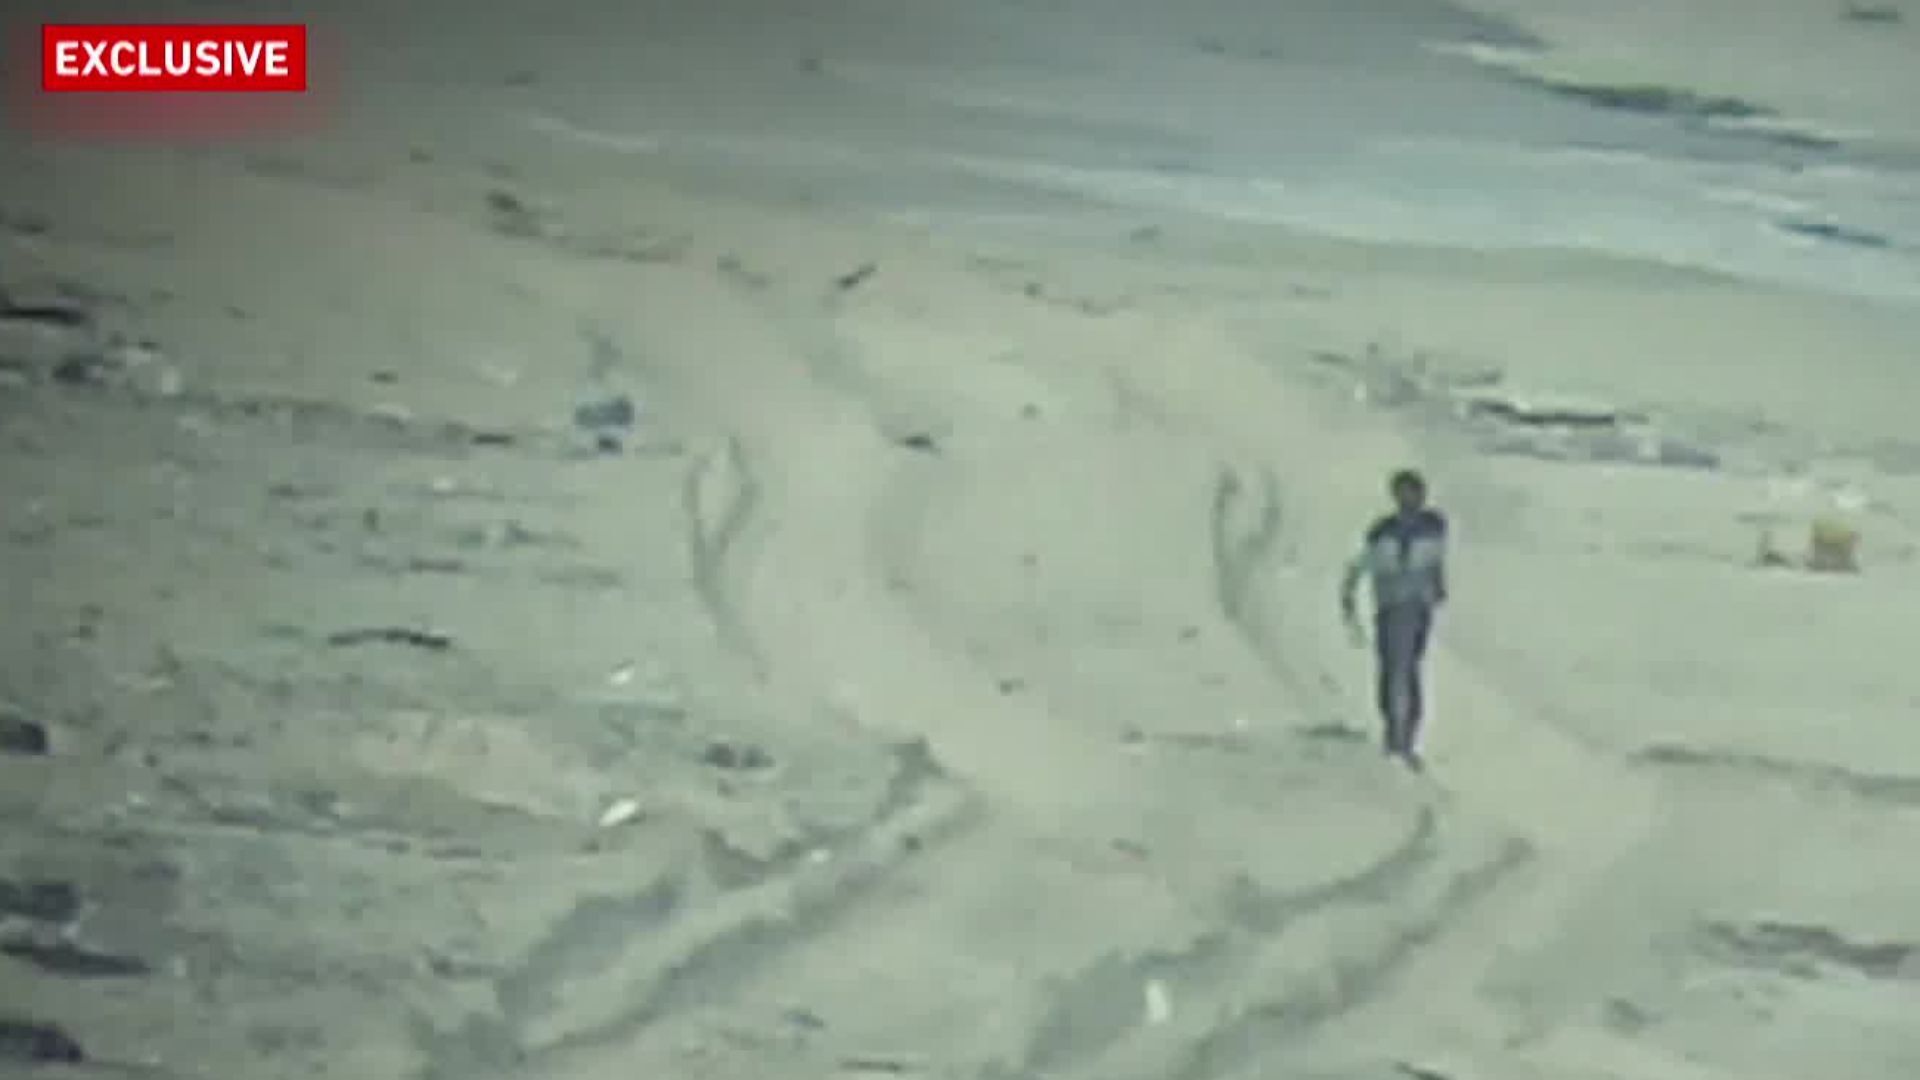 Israeli soldiers shoot and kill two unarmed Palestinian men in Gaza: Video